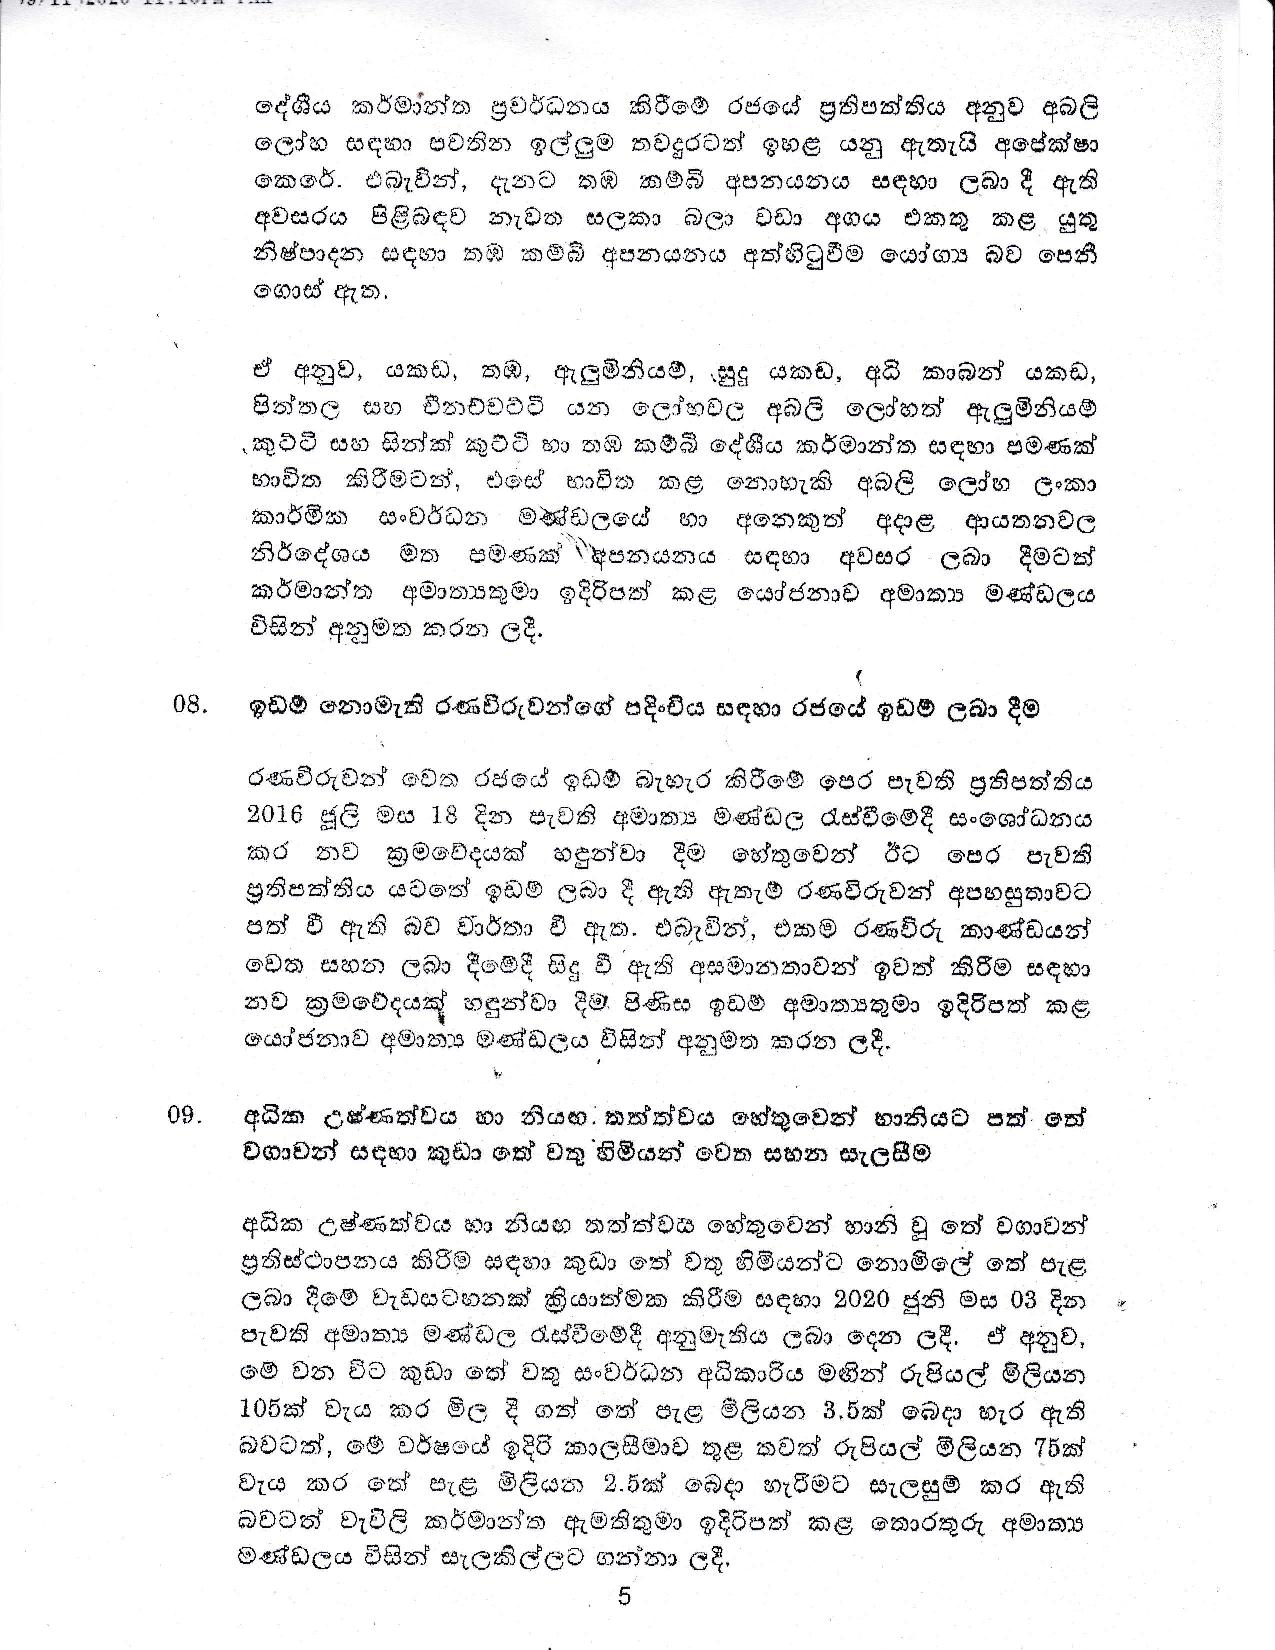 Cabinet Decision on 09.11.2020 page 005